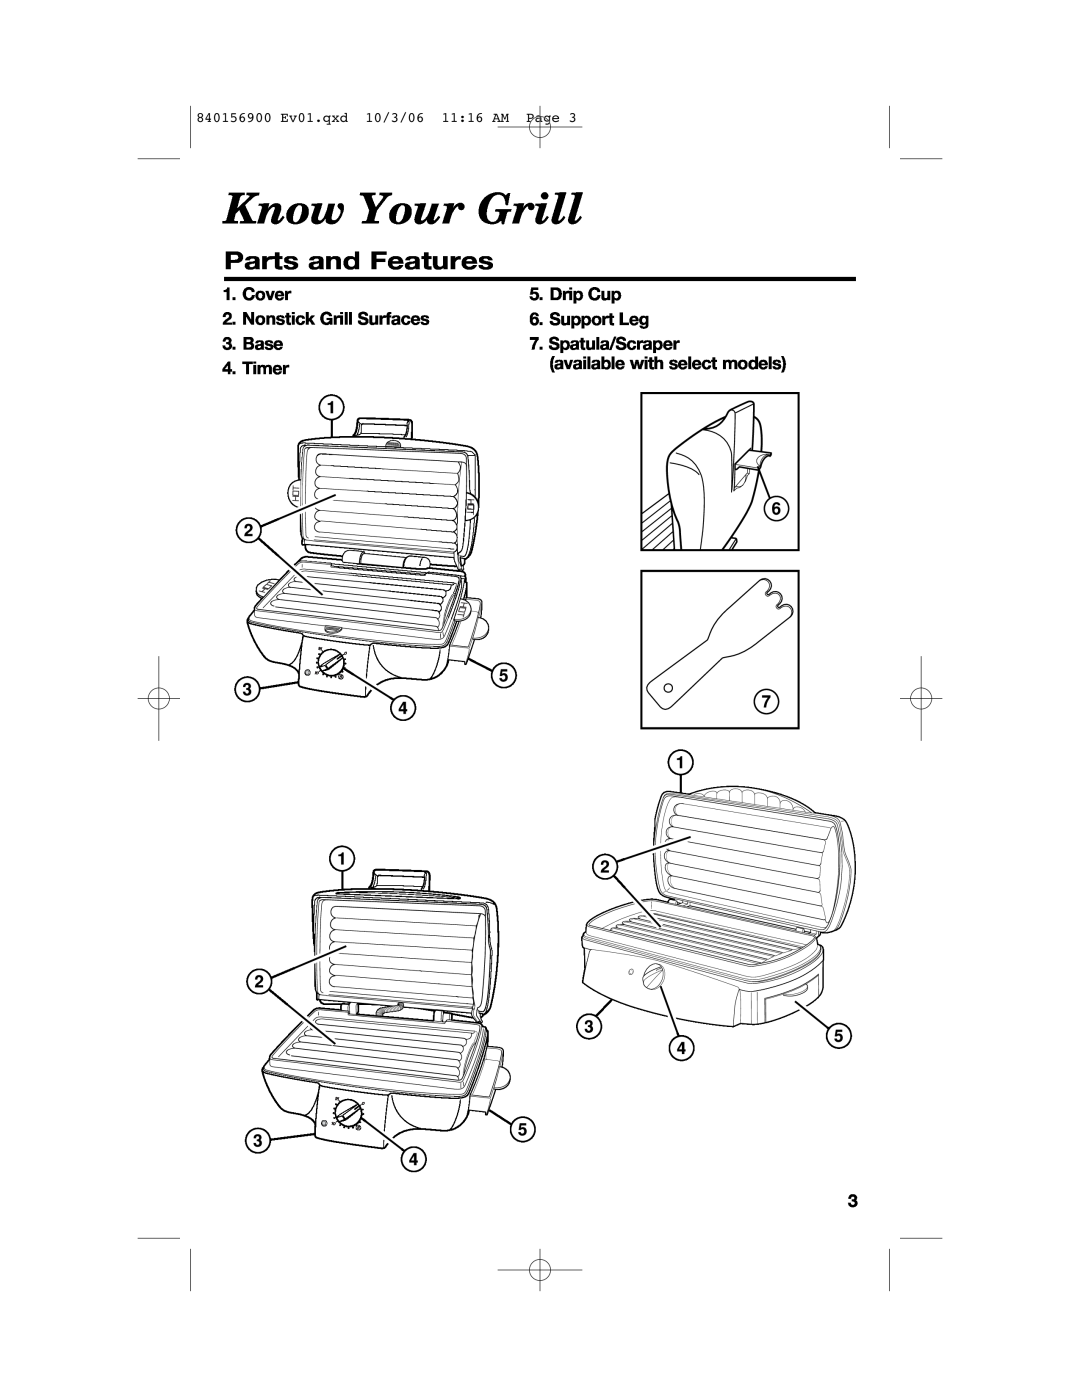 Hamilton Beach 25285 Know Your Grill, Parts and Features, Cover, Drip Cup, Nonstick Grill Surfaces, Support Leg, Base 